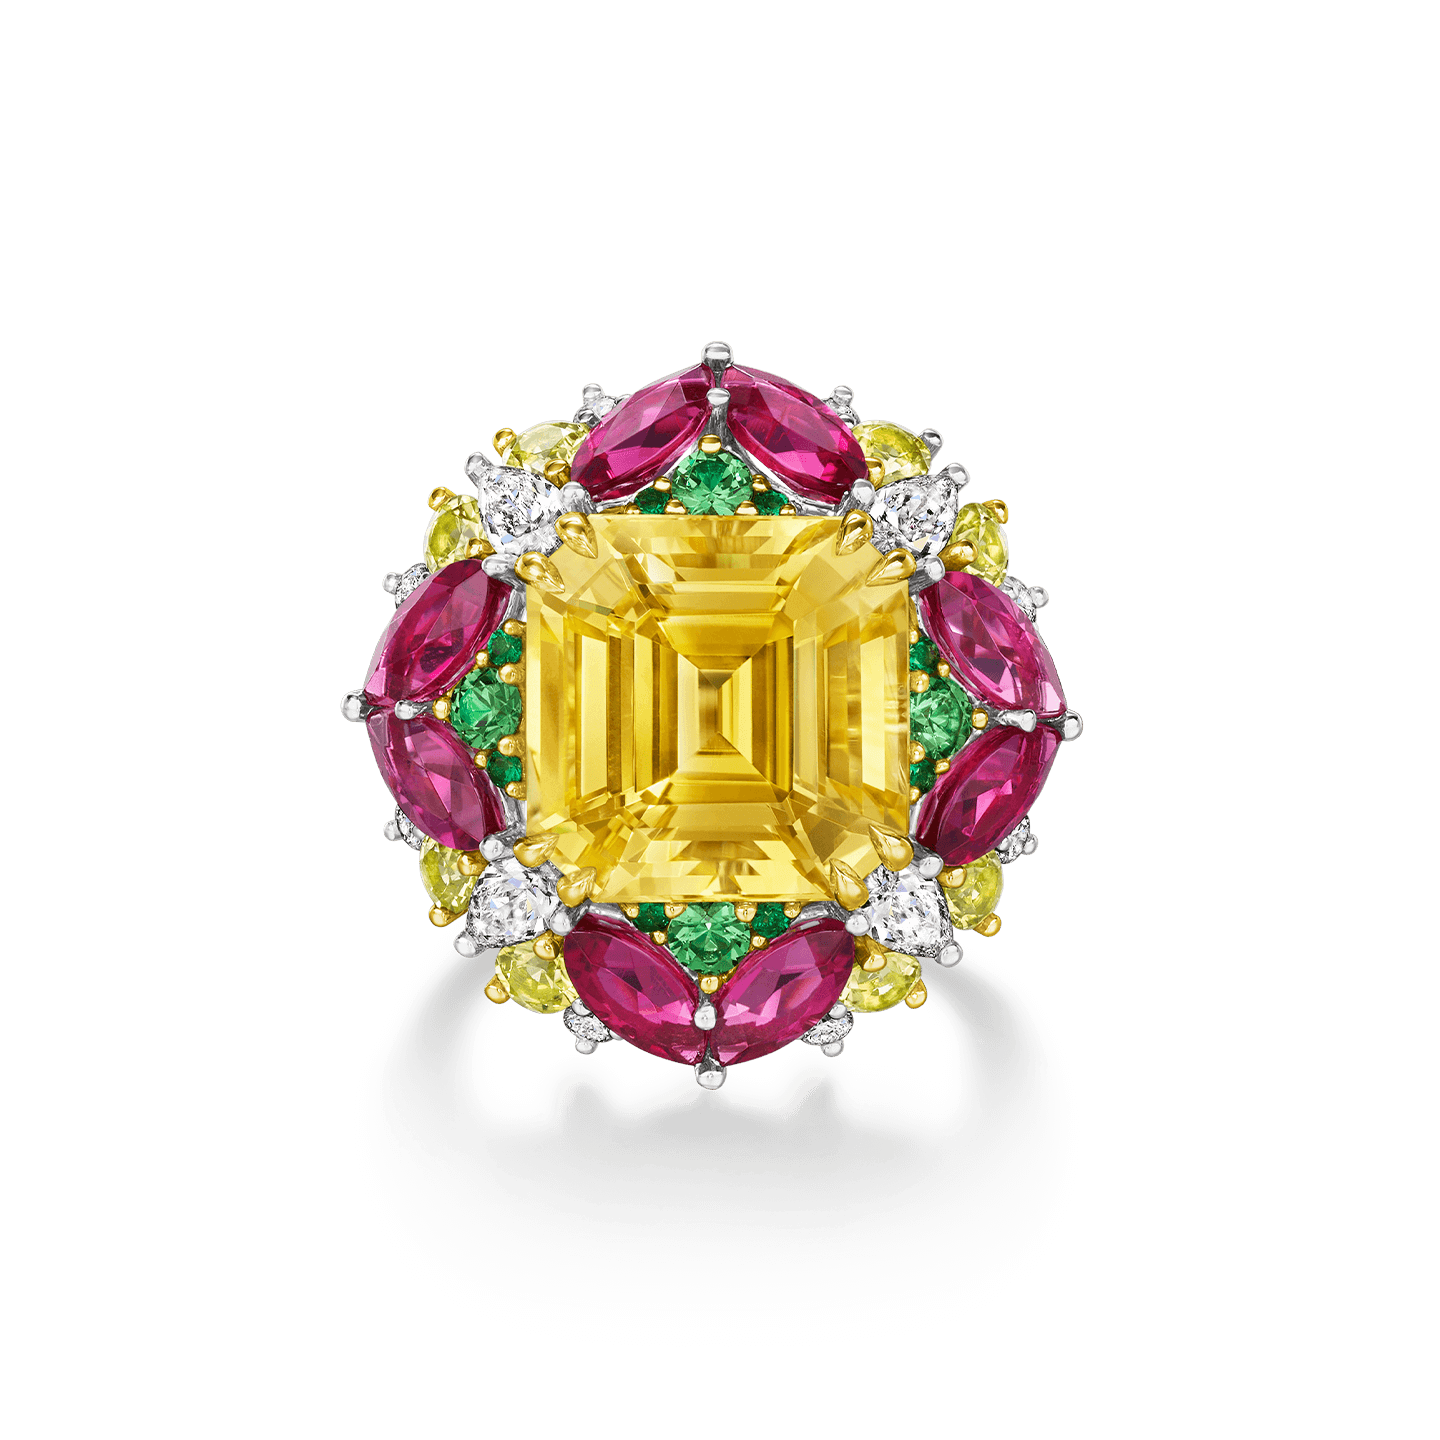 A Winston Candy Yellow Sapphire Ring with candies on a pink background. 